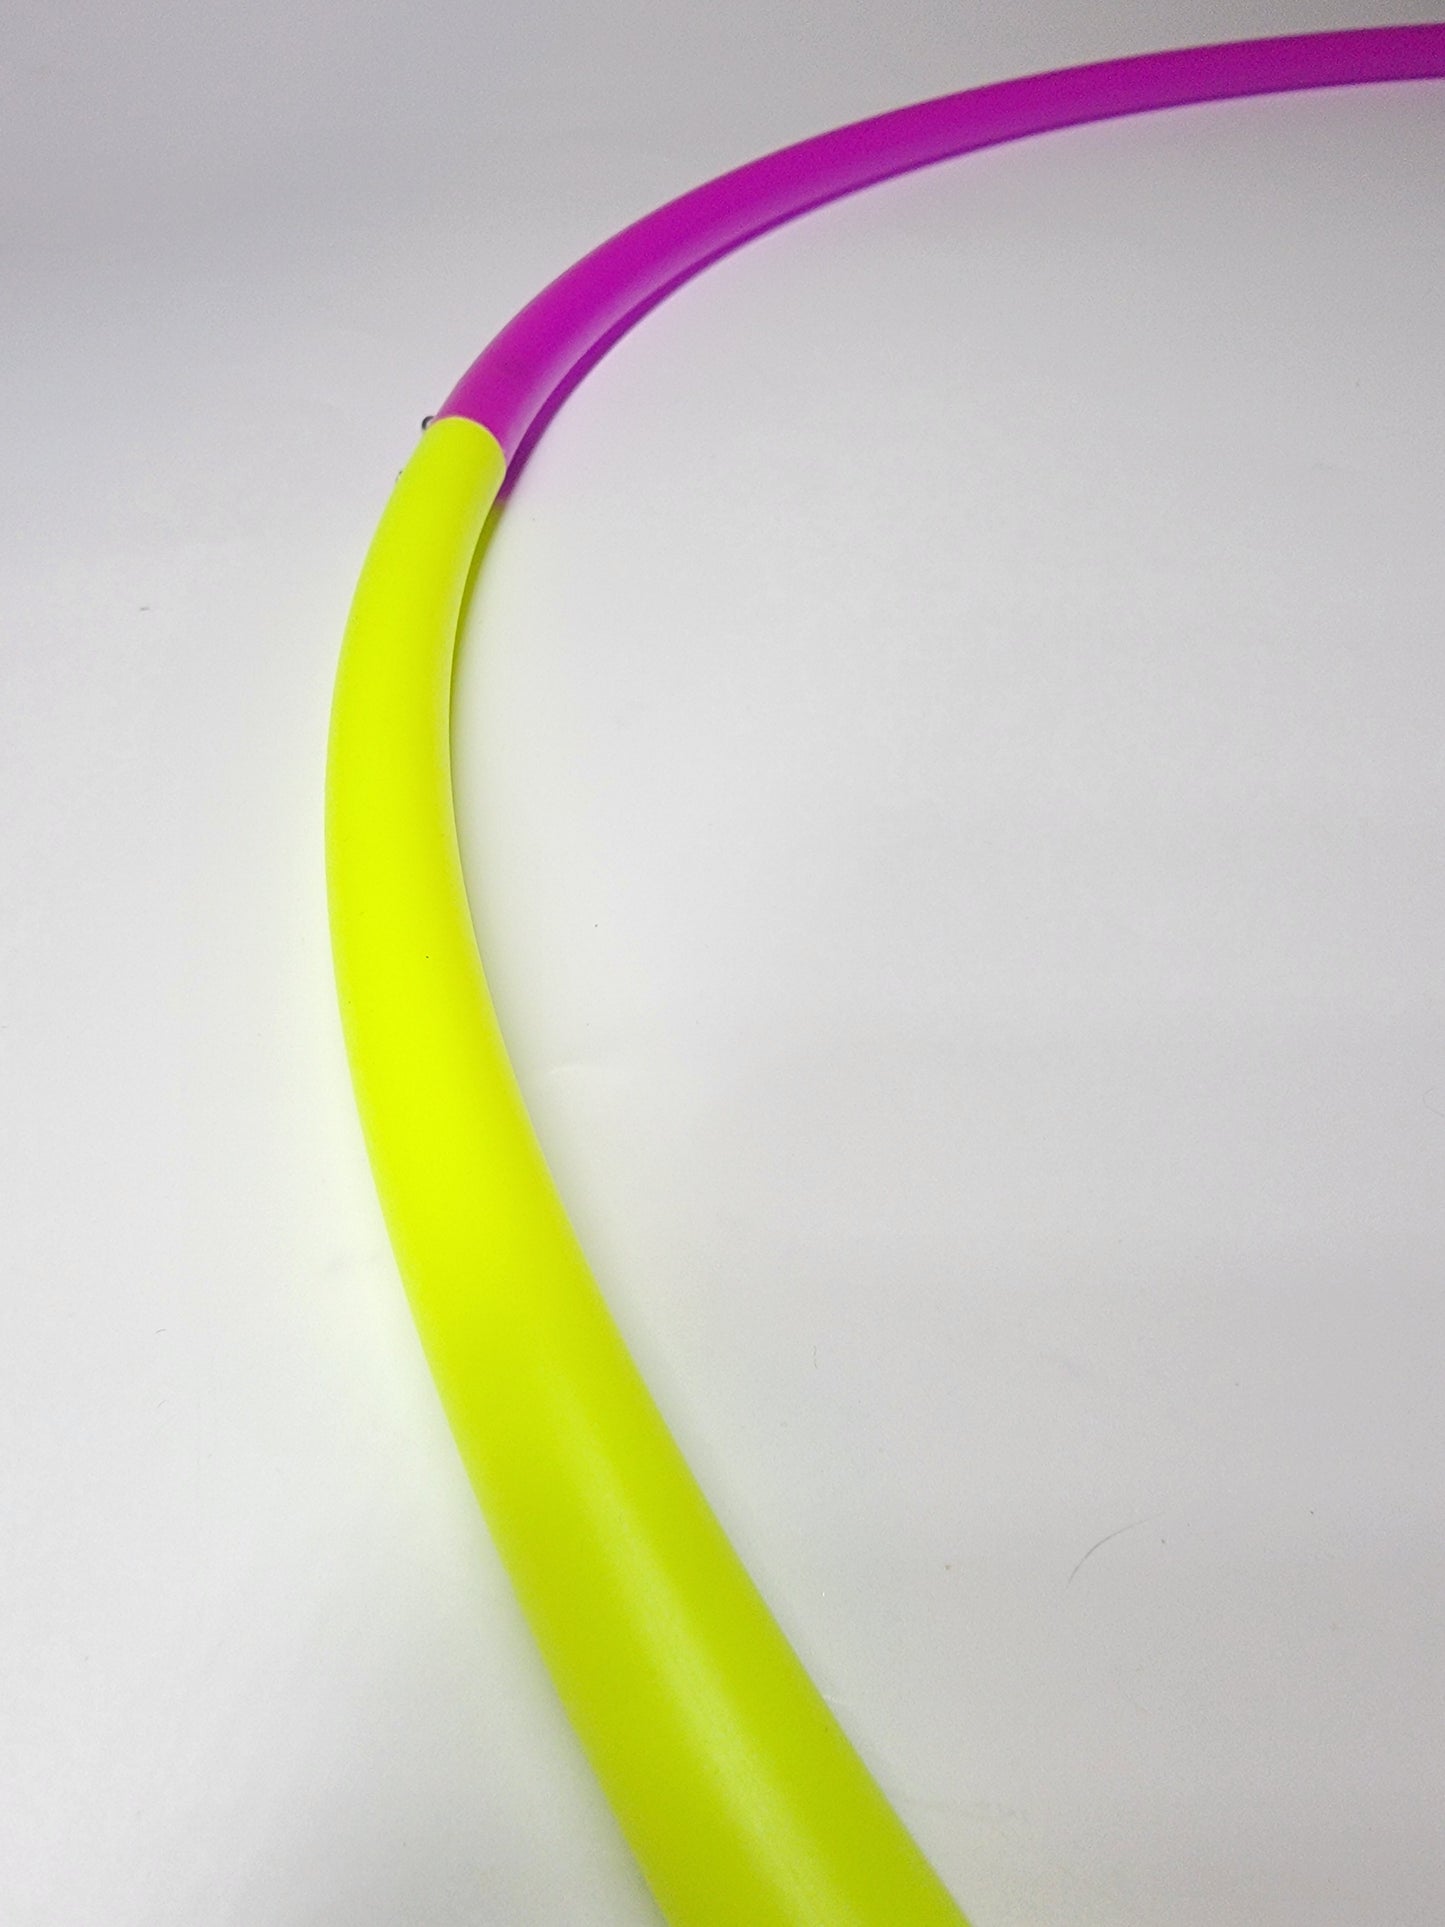 UV Yellow, Translucent Teal, and UV Fuschia 4 Piece Sectional Hoop